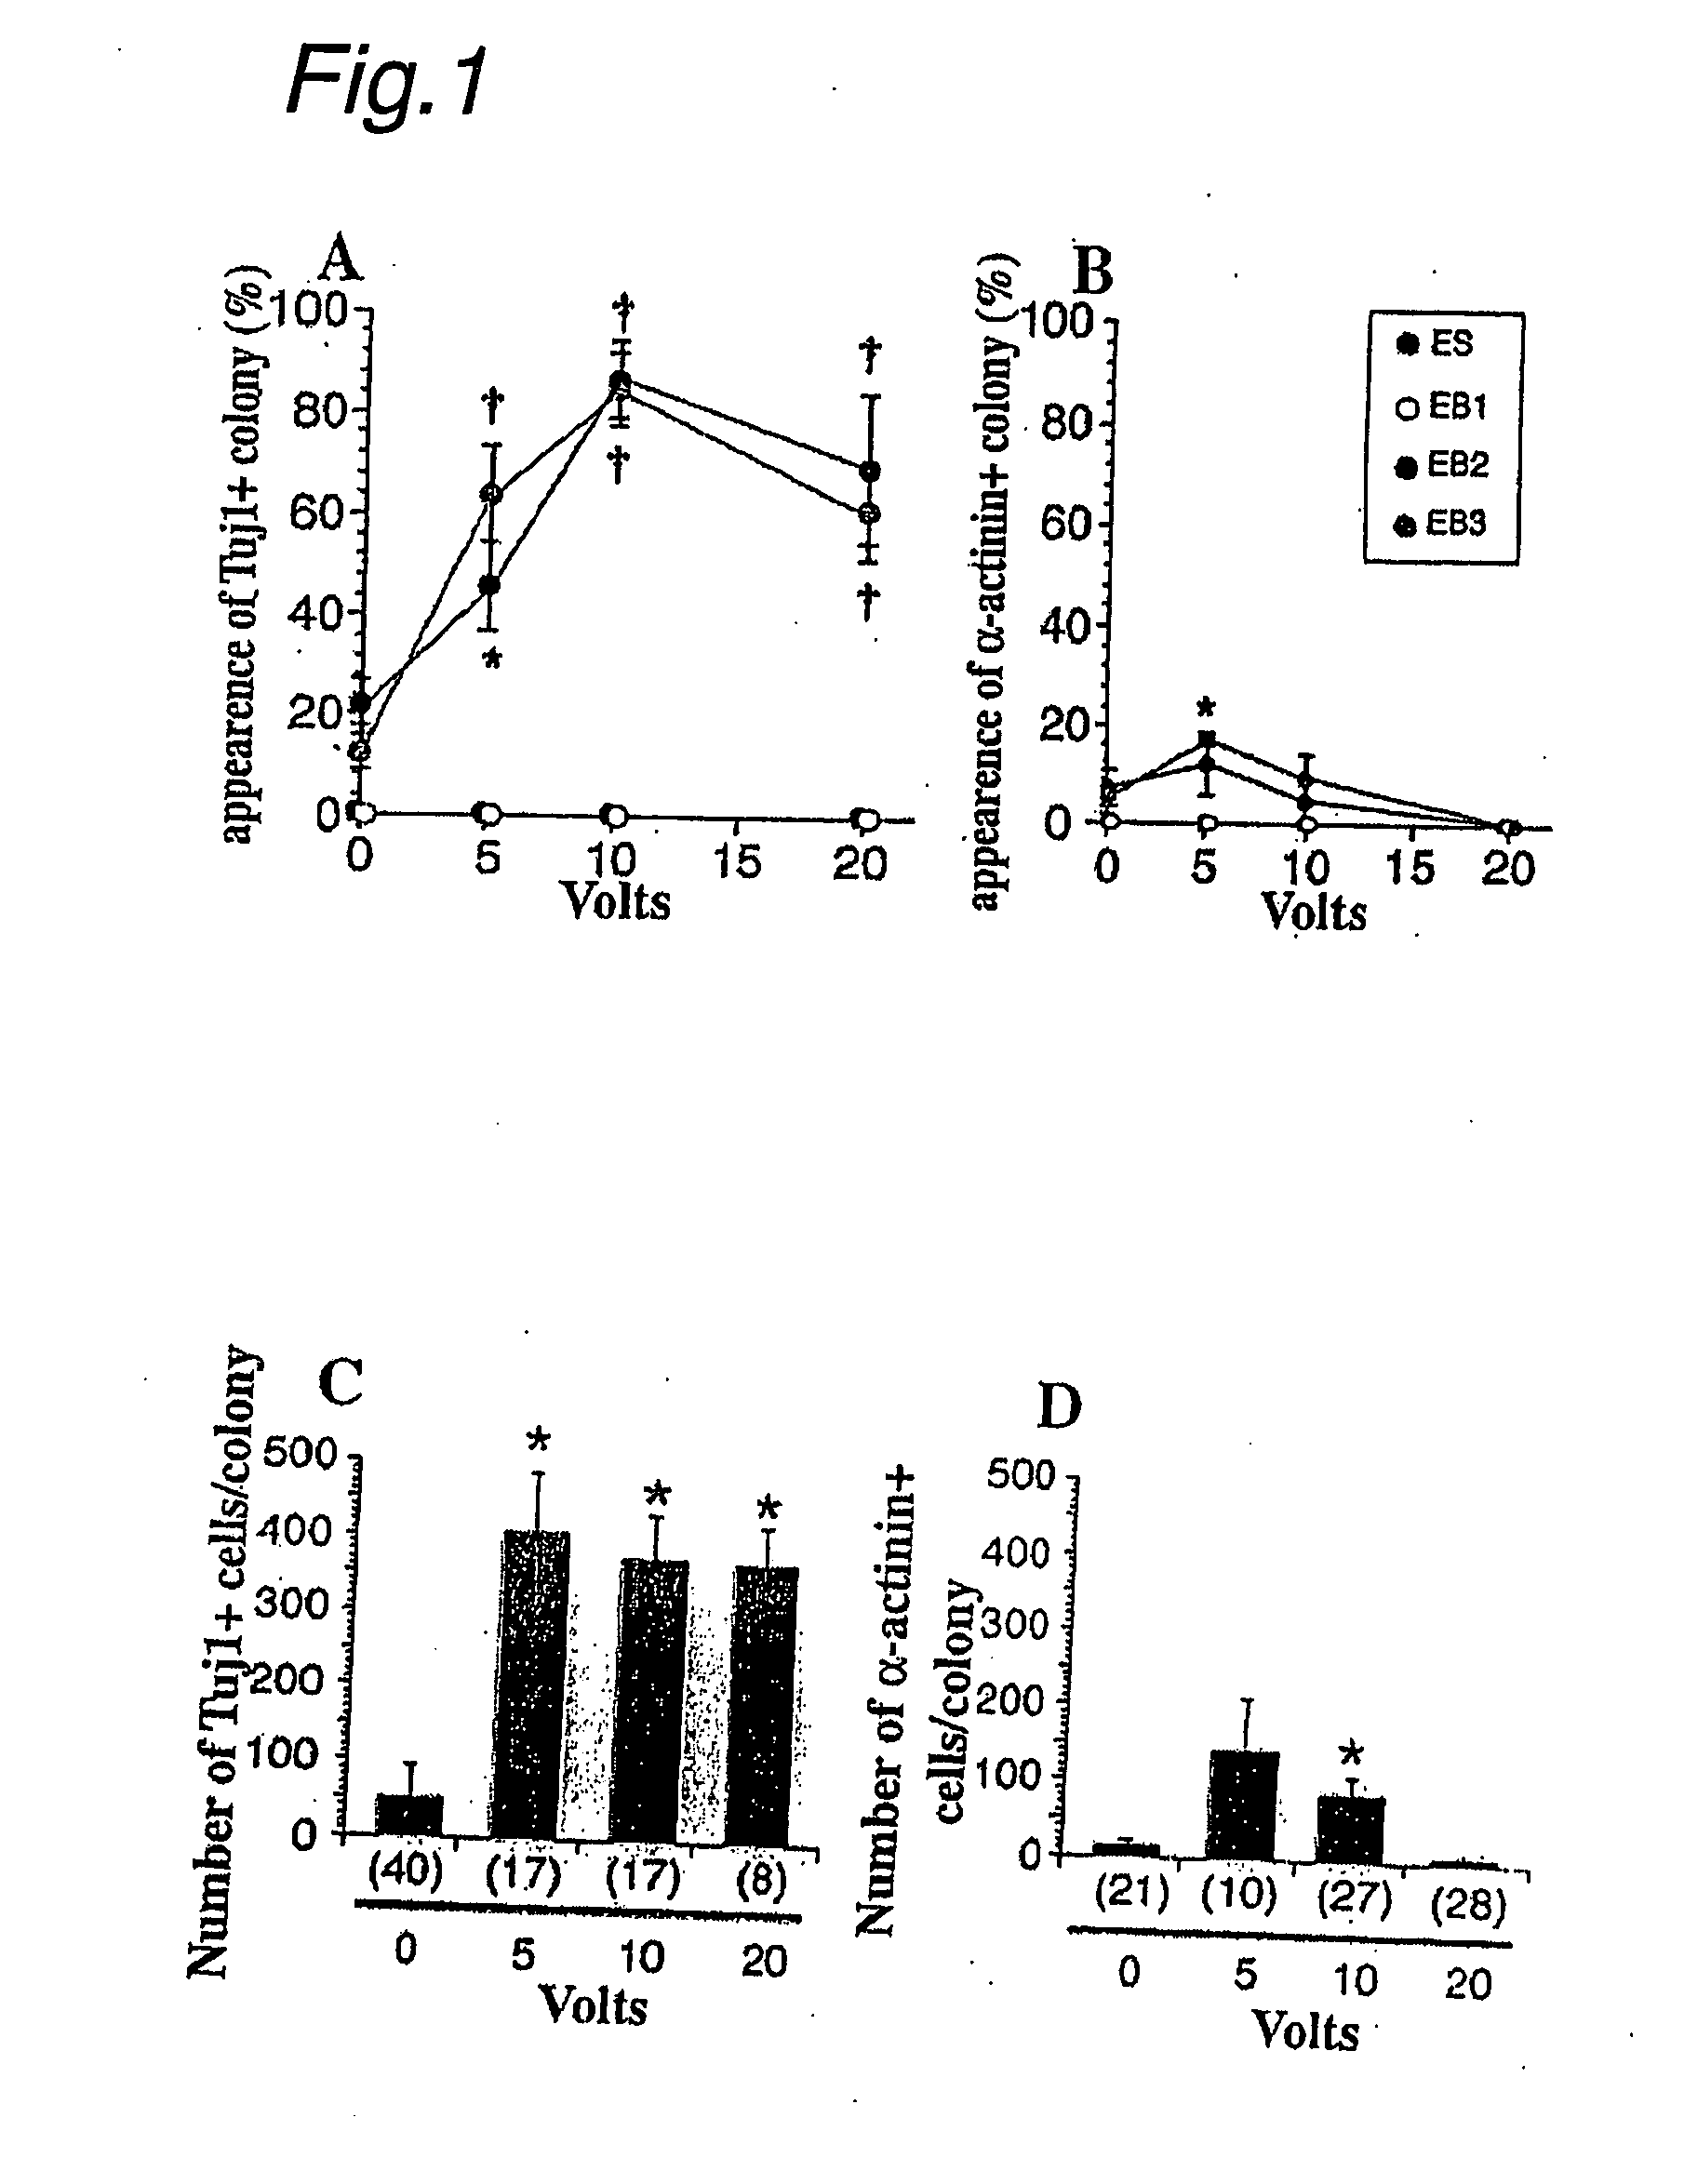 Neuronal cells obtained by electric pulse treatment of es cells